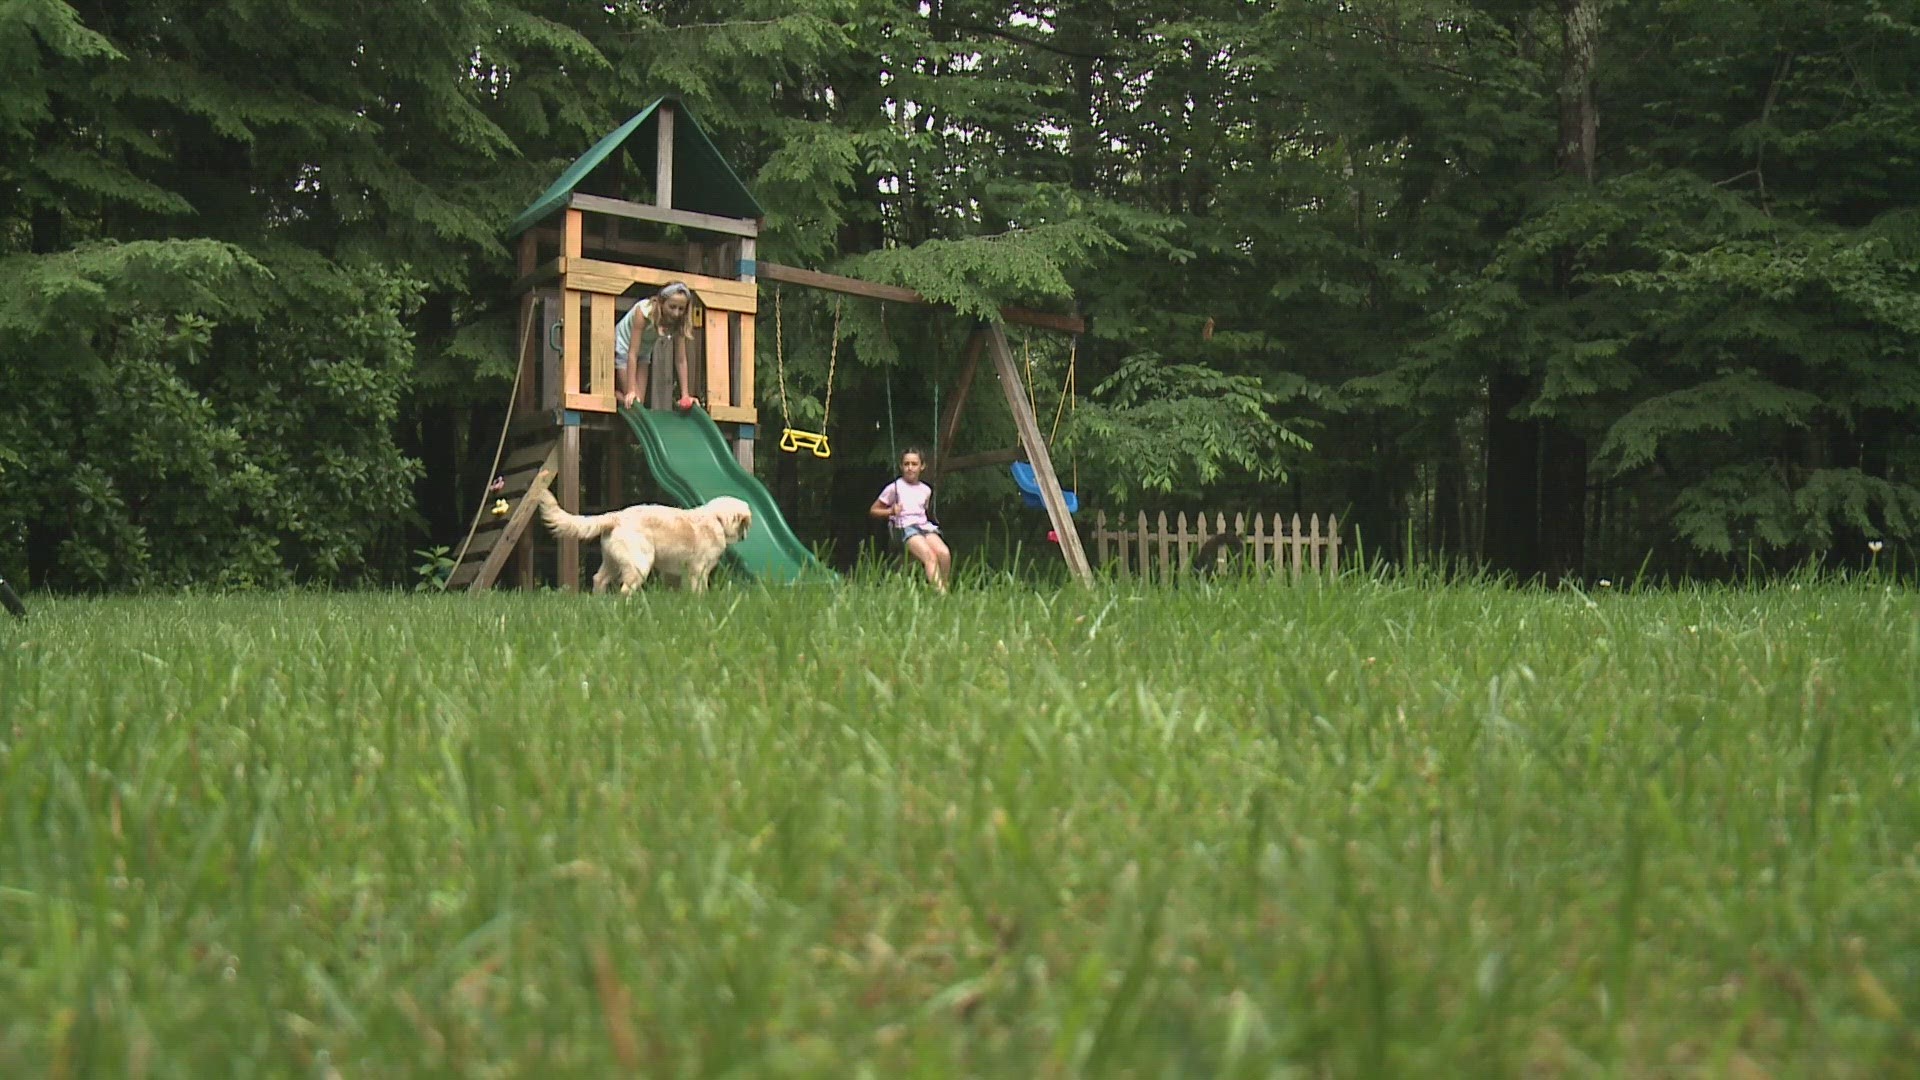 The CDC says kids are the most at risk for Lyme because they often play where ticks are active.